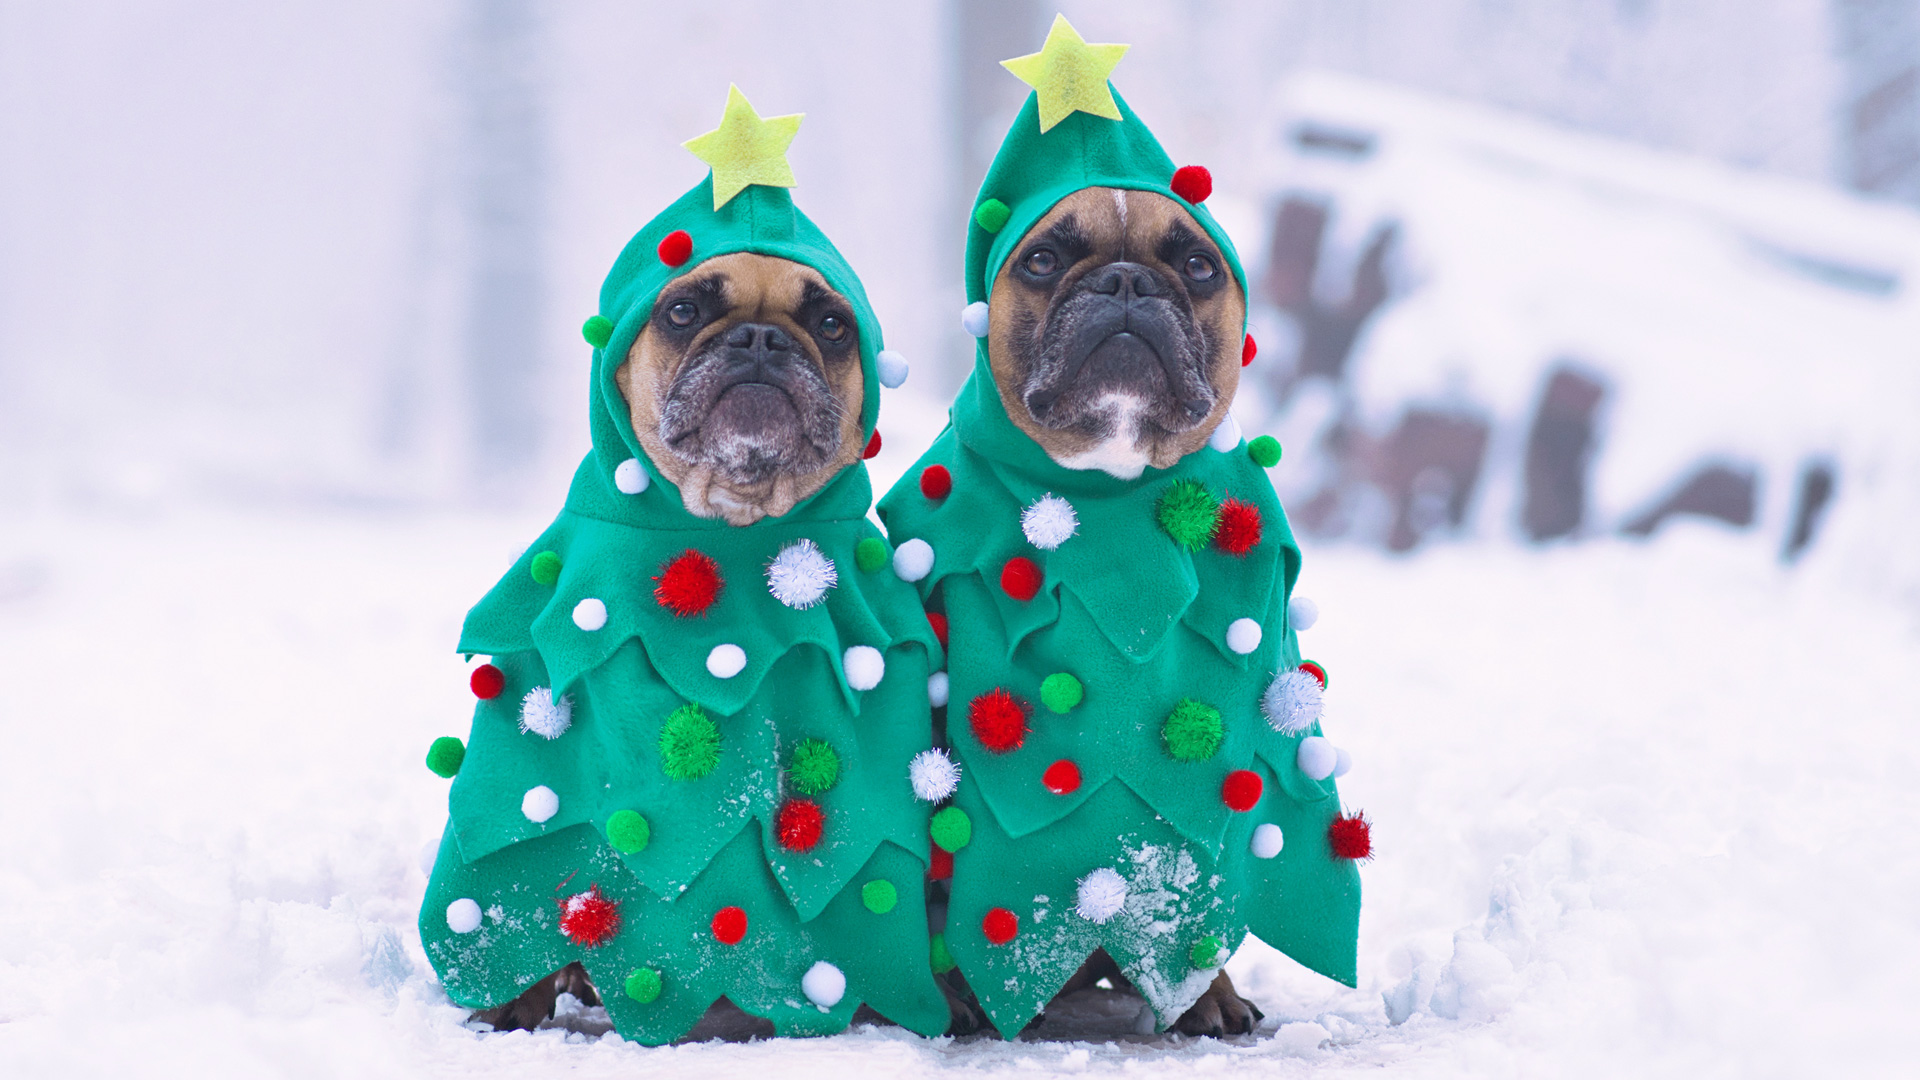 Two pugs in a snowy place standing next to each other dressed as Christmas trees.